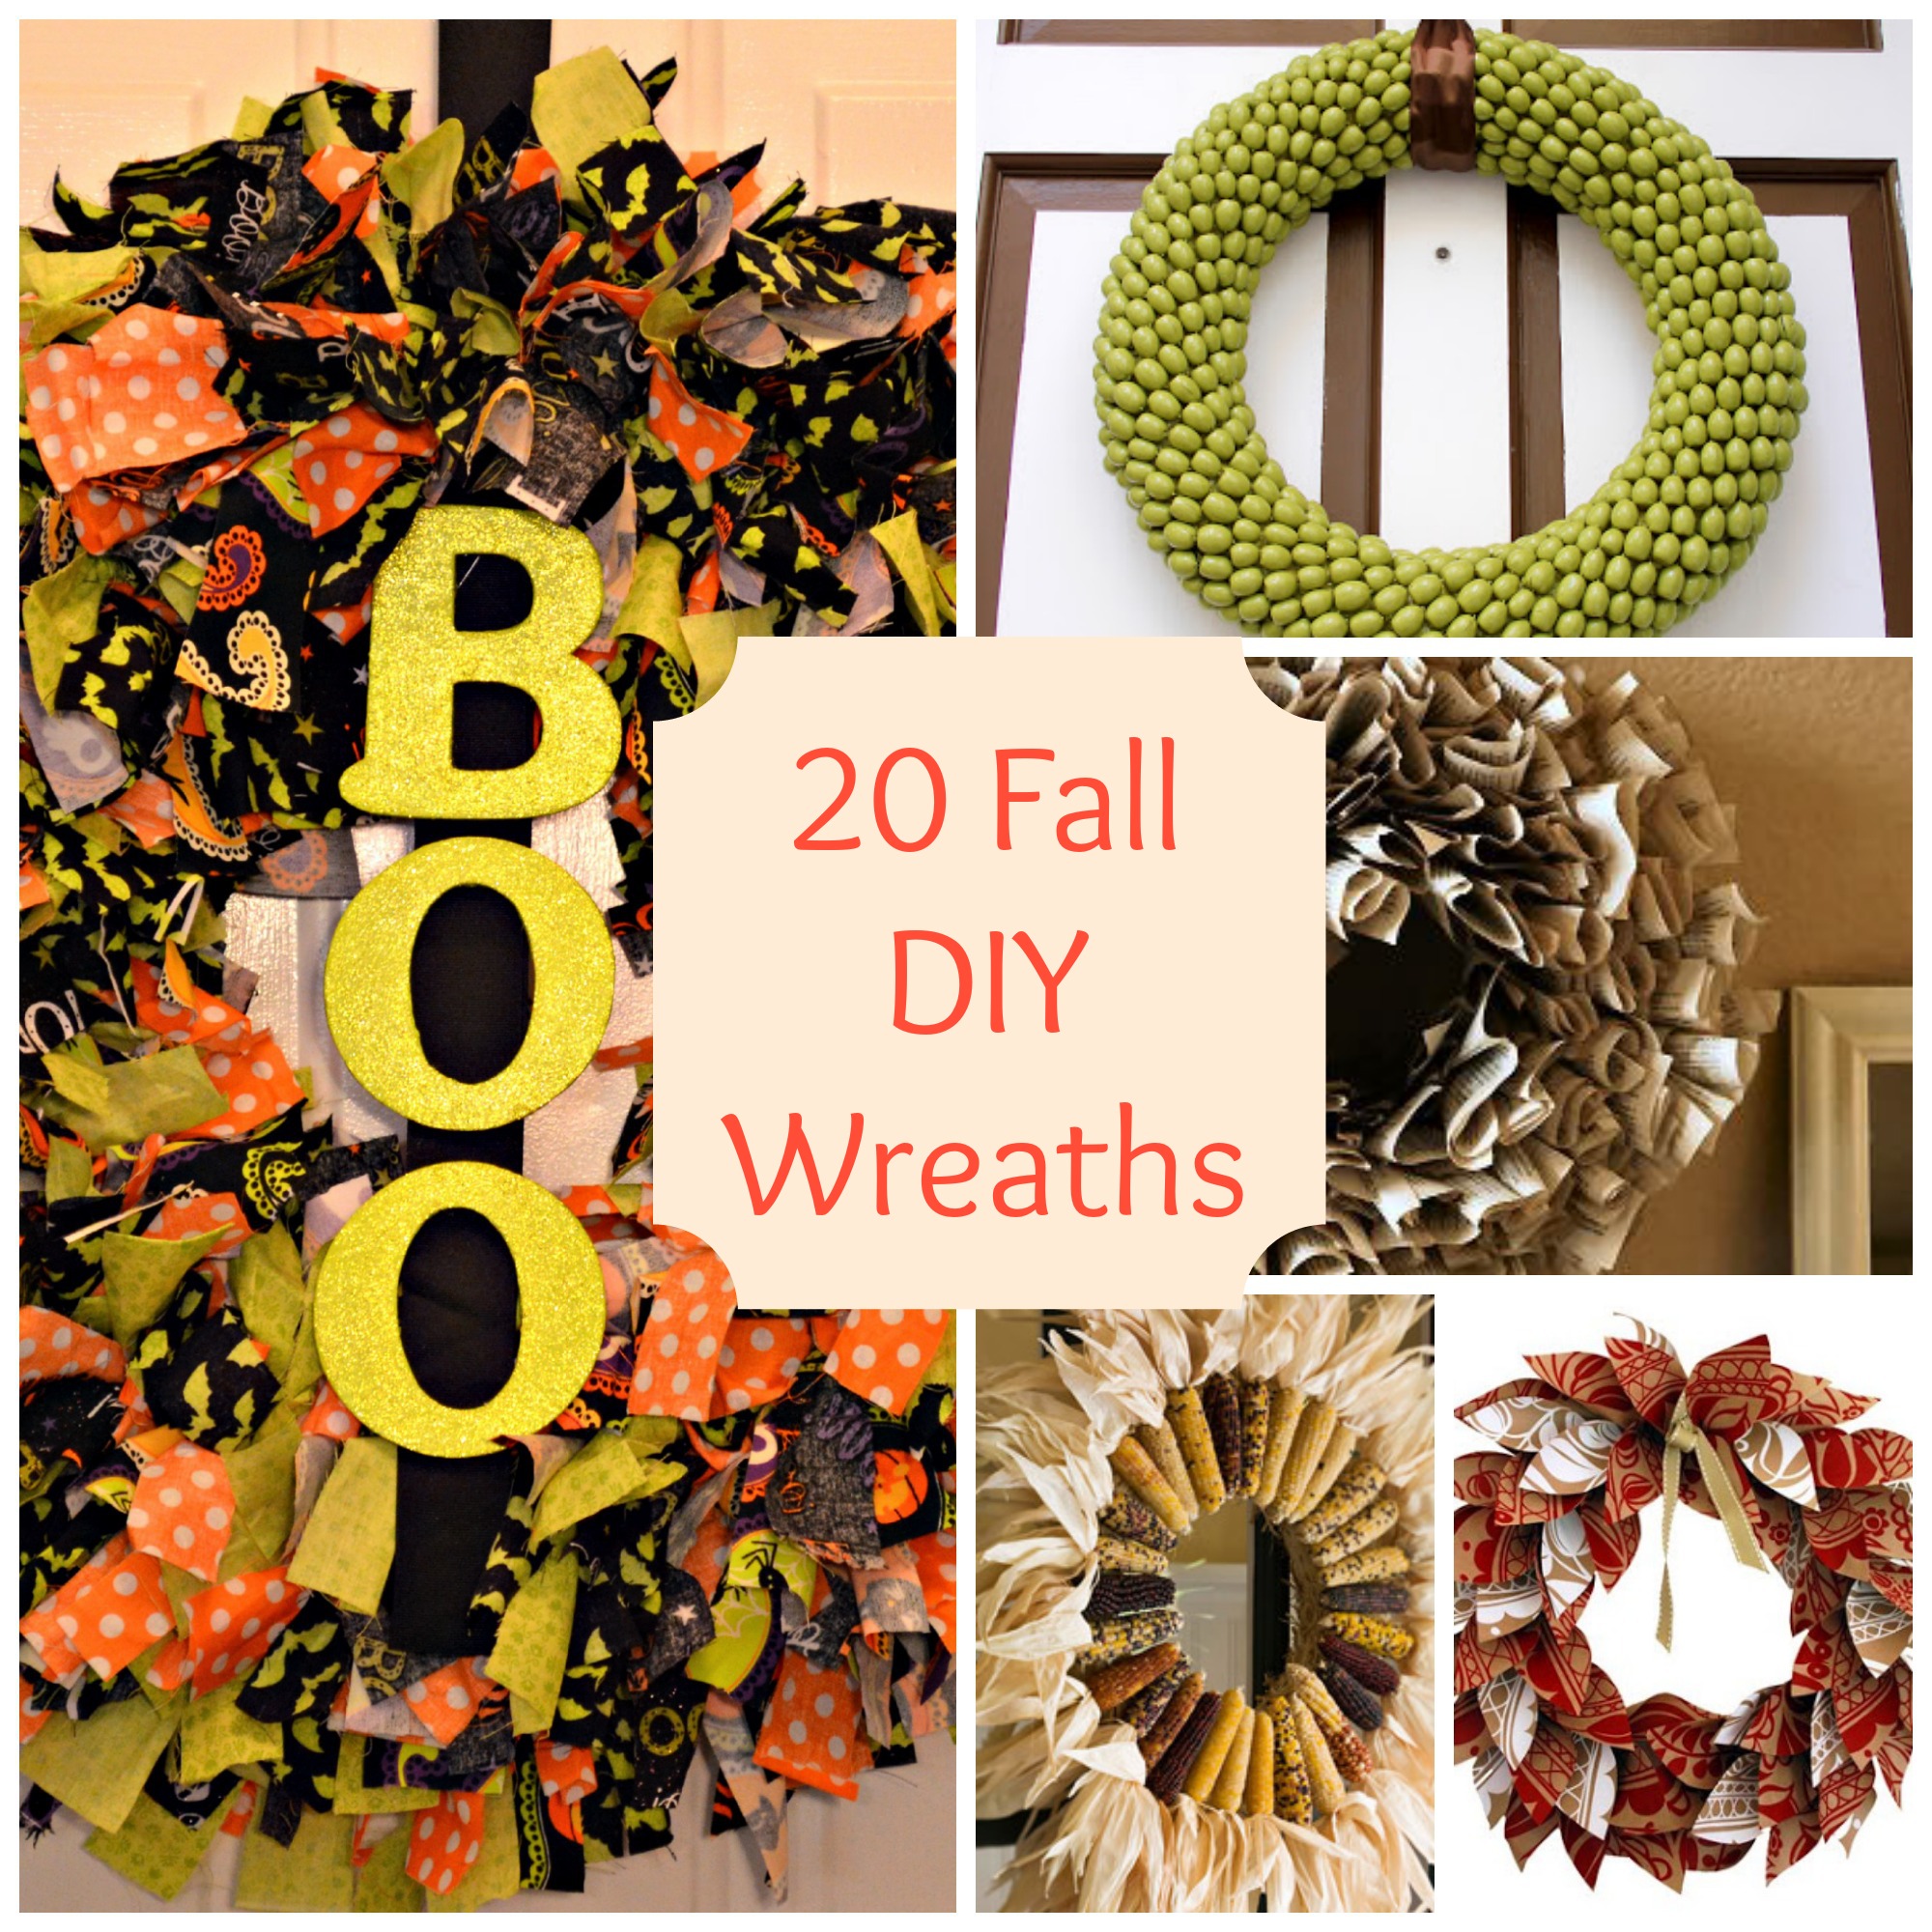 Front Door Wreaths | 13 Awesome Decorating Ideas To FALL For! | http://livingroomideas.com/13-awesome-decorating-ideas-to-fall-for/